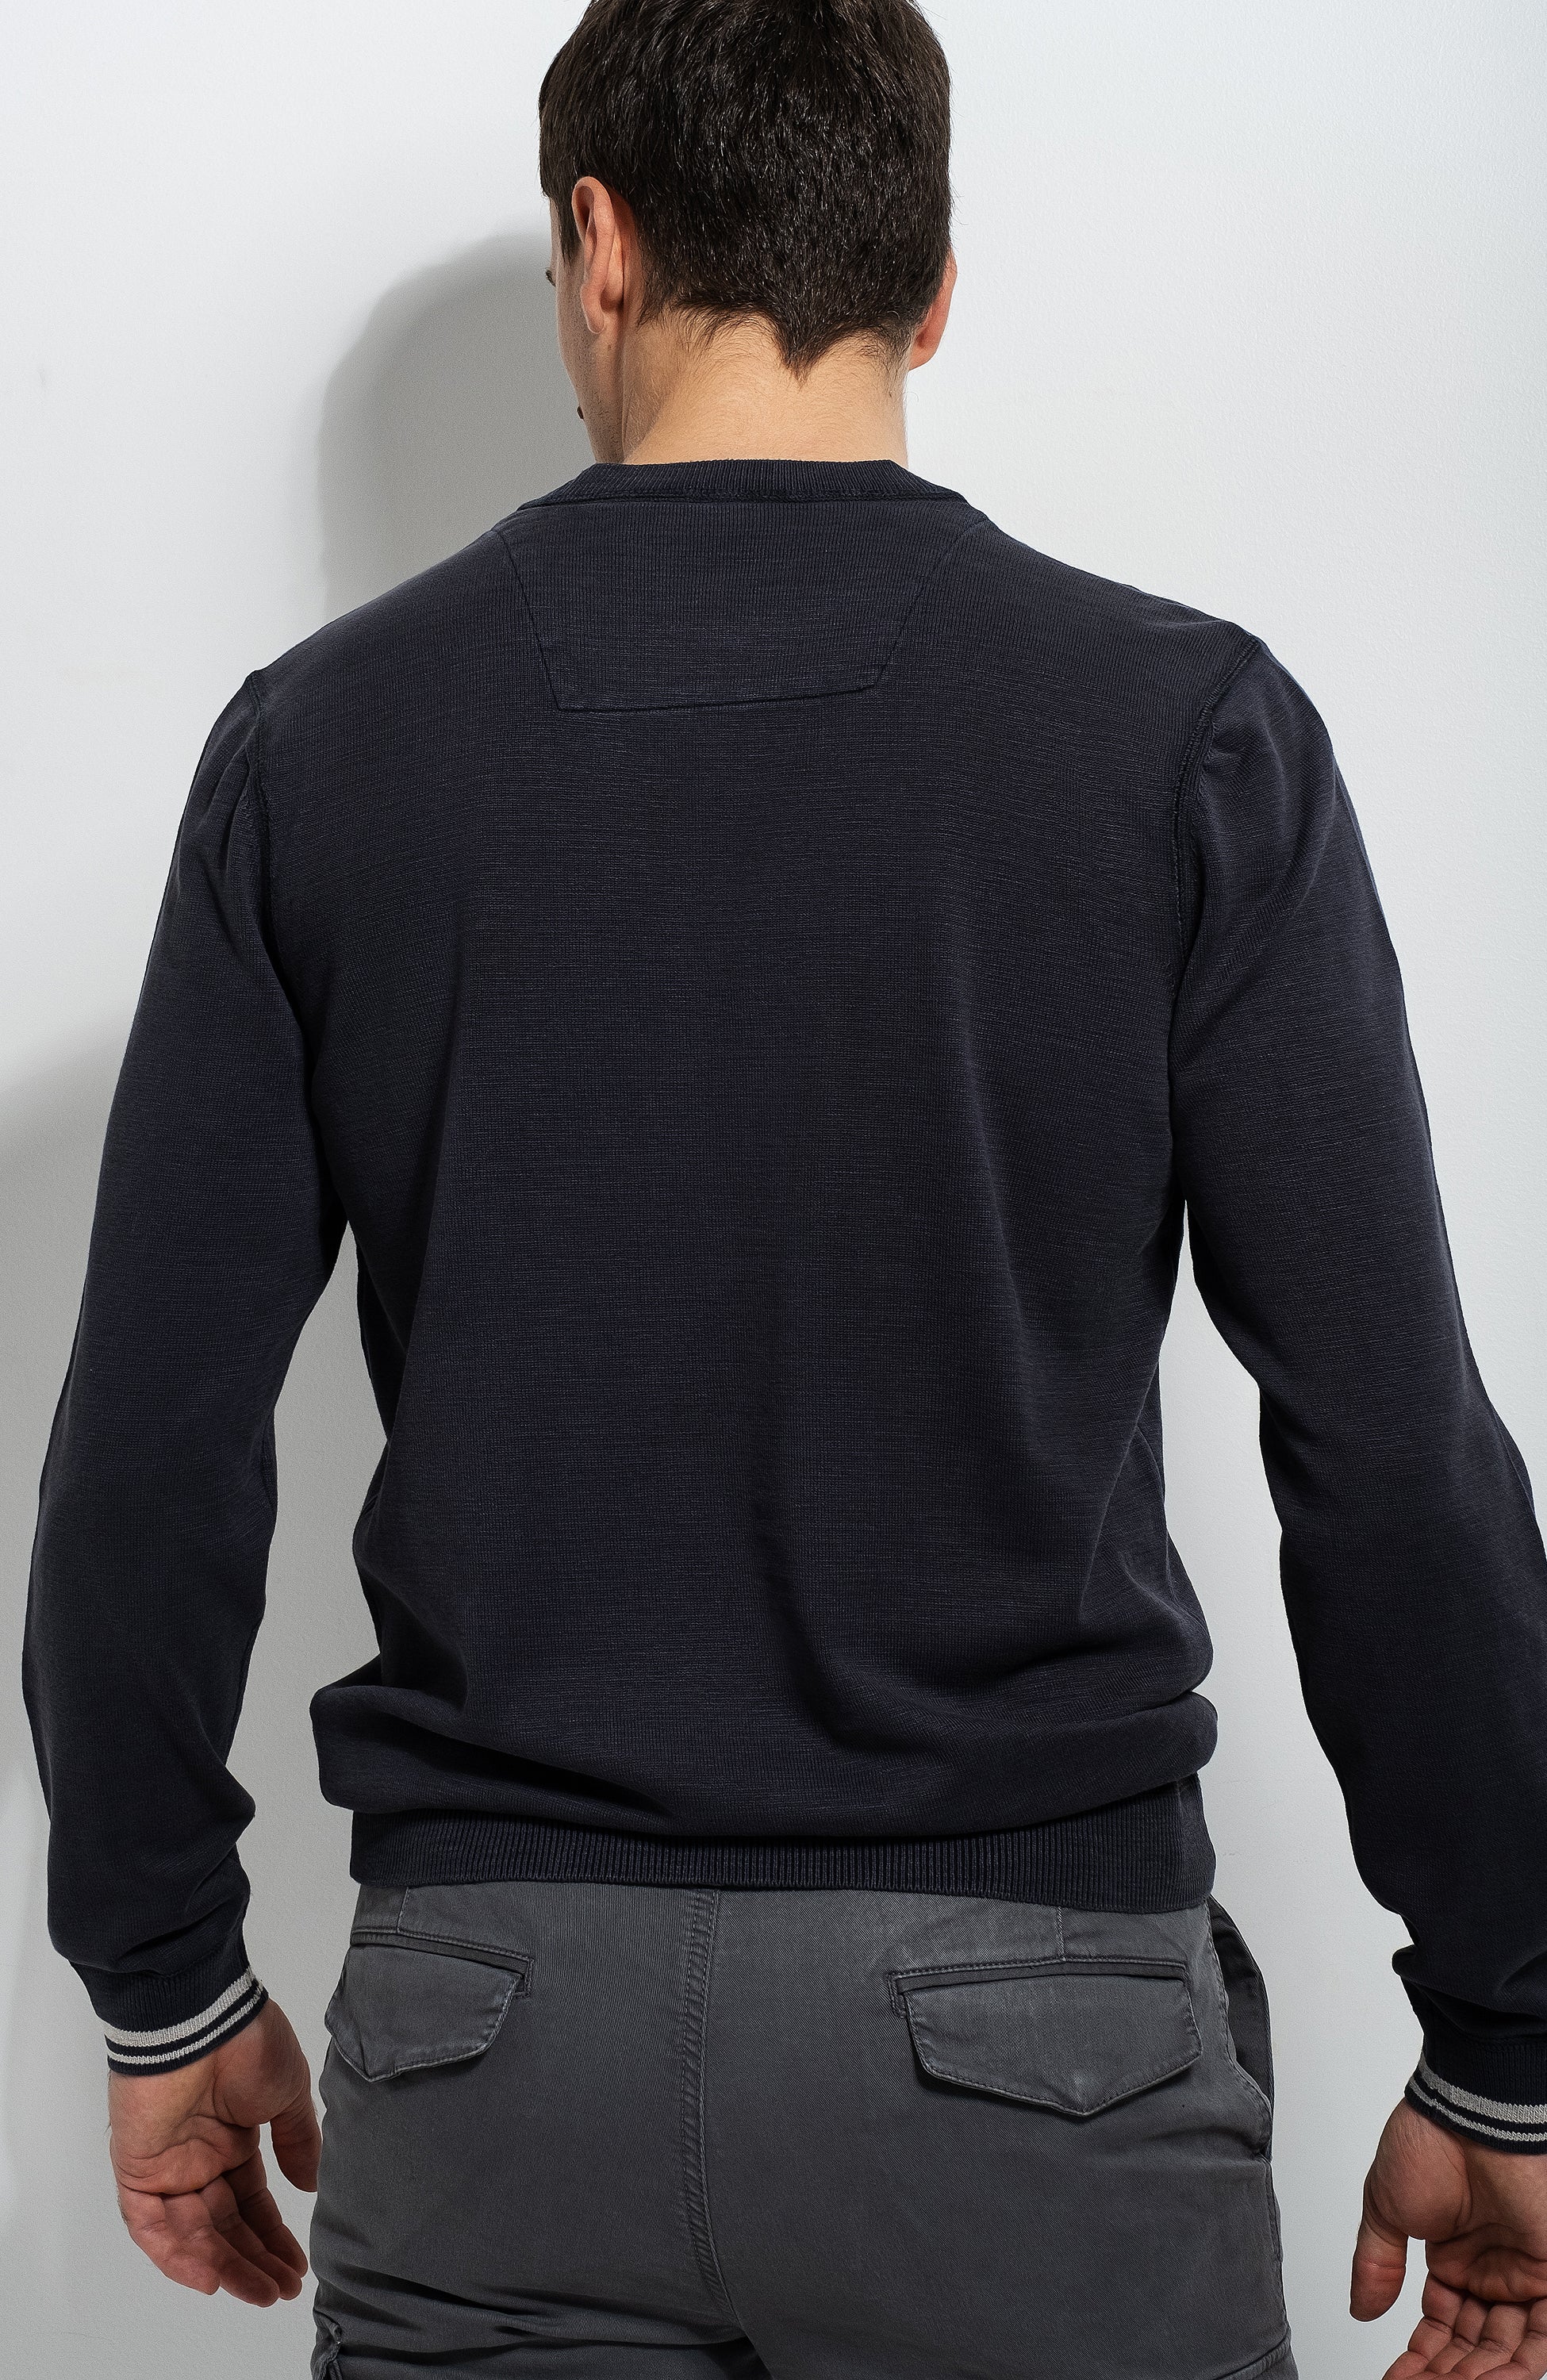 Garment-dyed cotton sweater